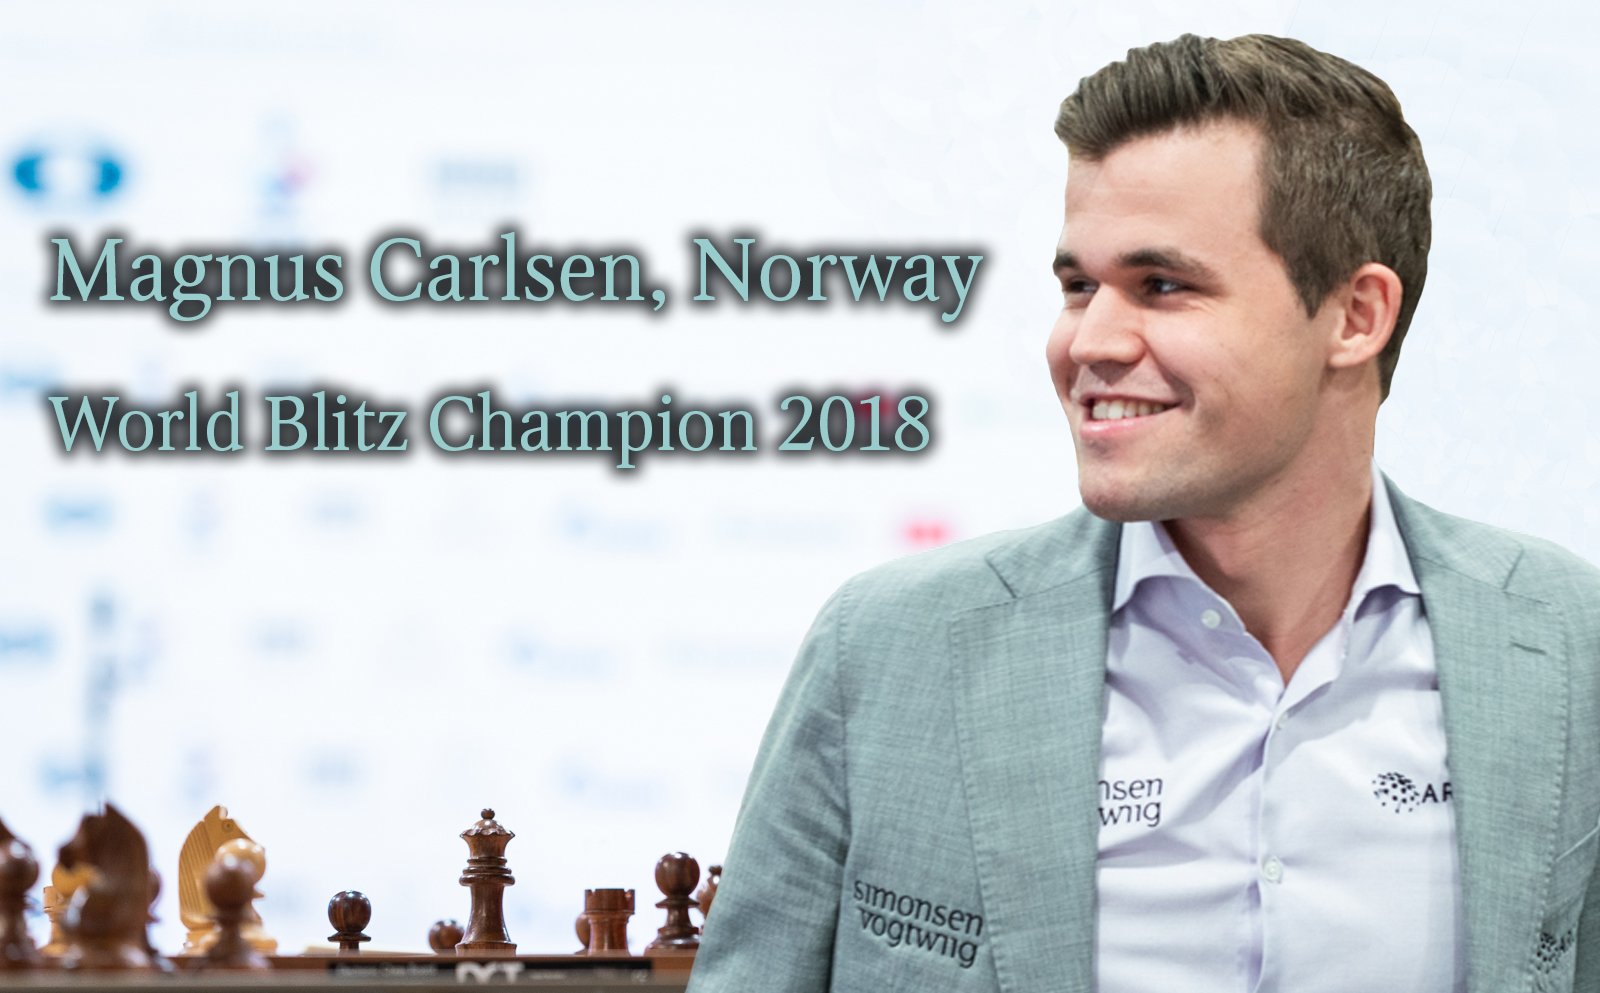 International Chess Federation on X: Magnus Carlsen becomes World Blitz  Champion for the 4th time! He scored incredible 17/21 undefeated.  Jan-Krzysztof Duda is second, Hikaru Nakamura is third. Congratulations!  #wrbc2018 Full standings